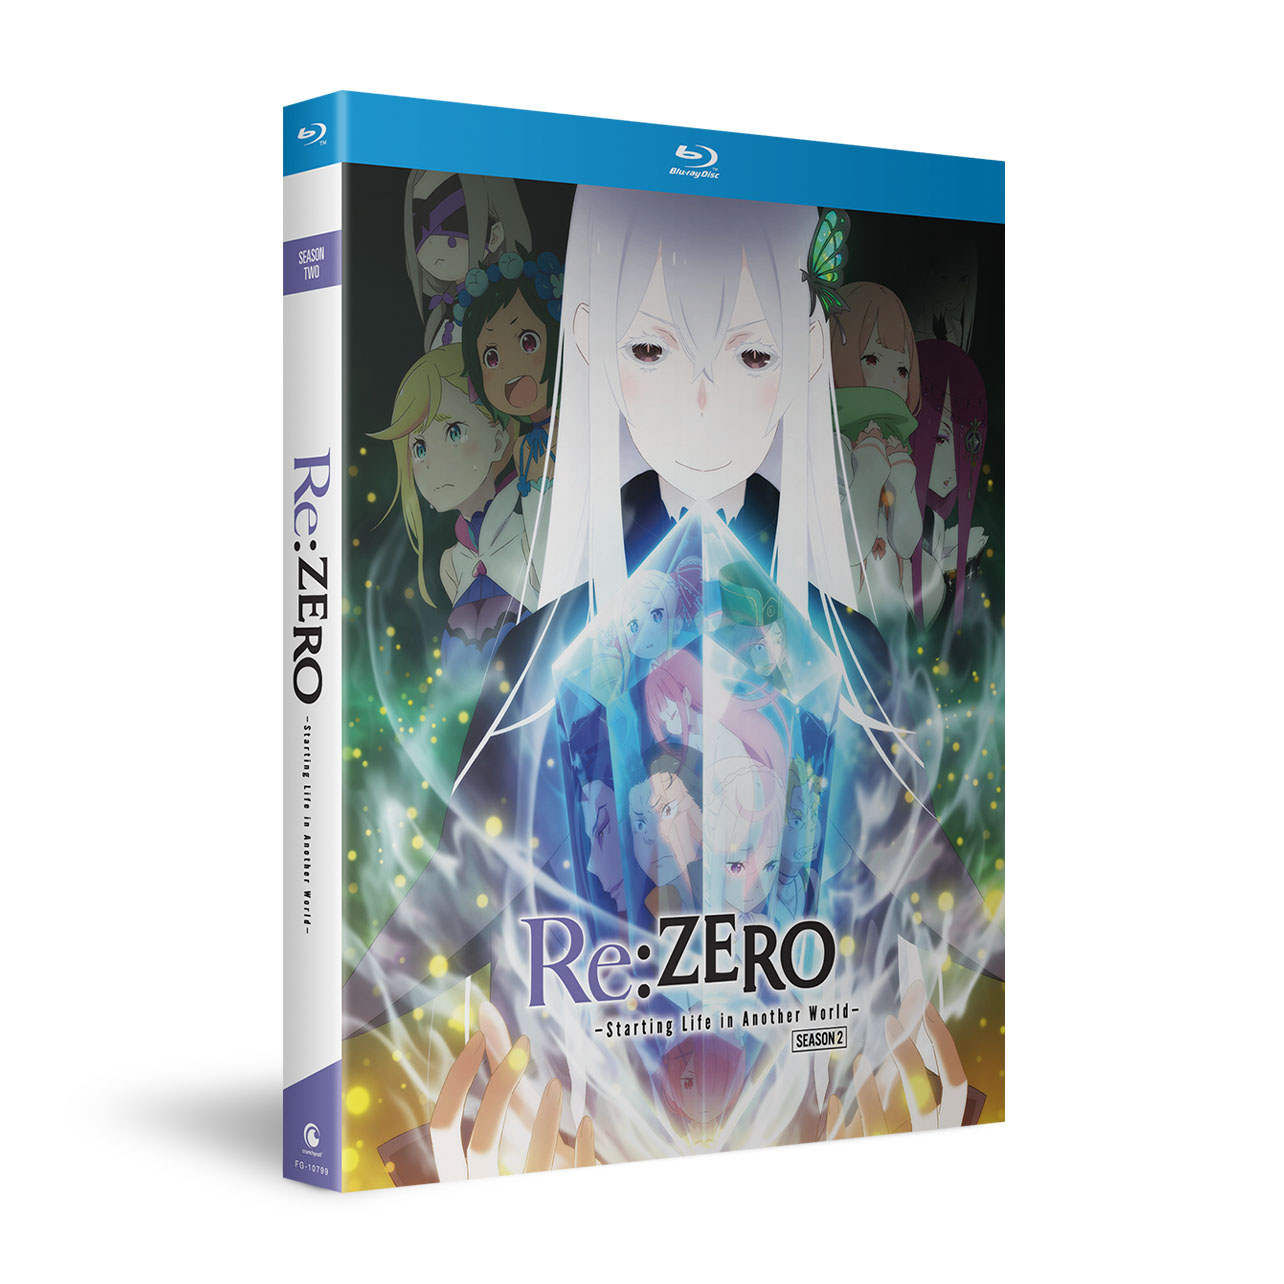 Re:ZERO -Starting Life in Another World- Season 2 - Blu-ray - Limited Edition image count 2